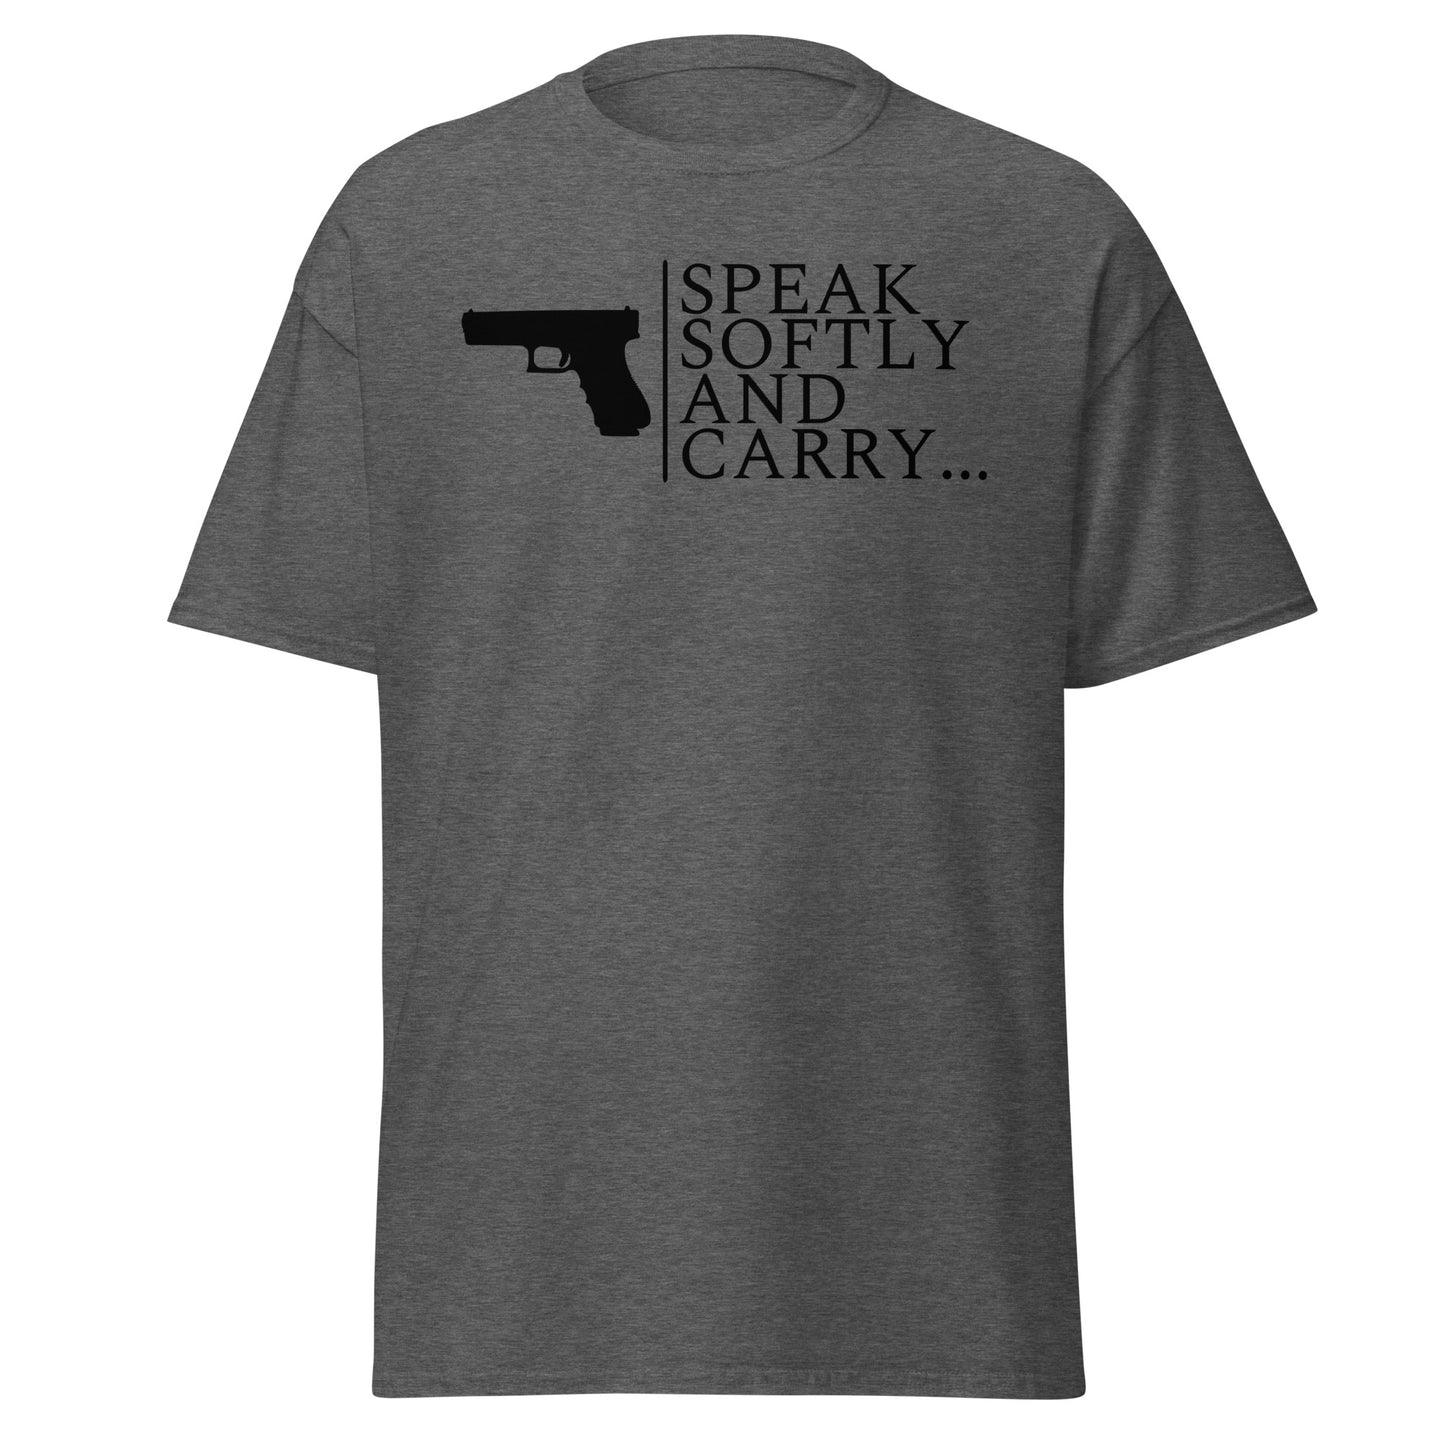 Speak softly and carry...